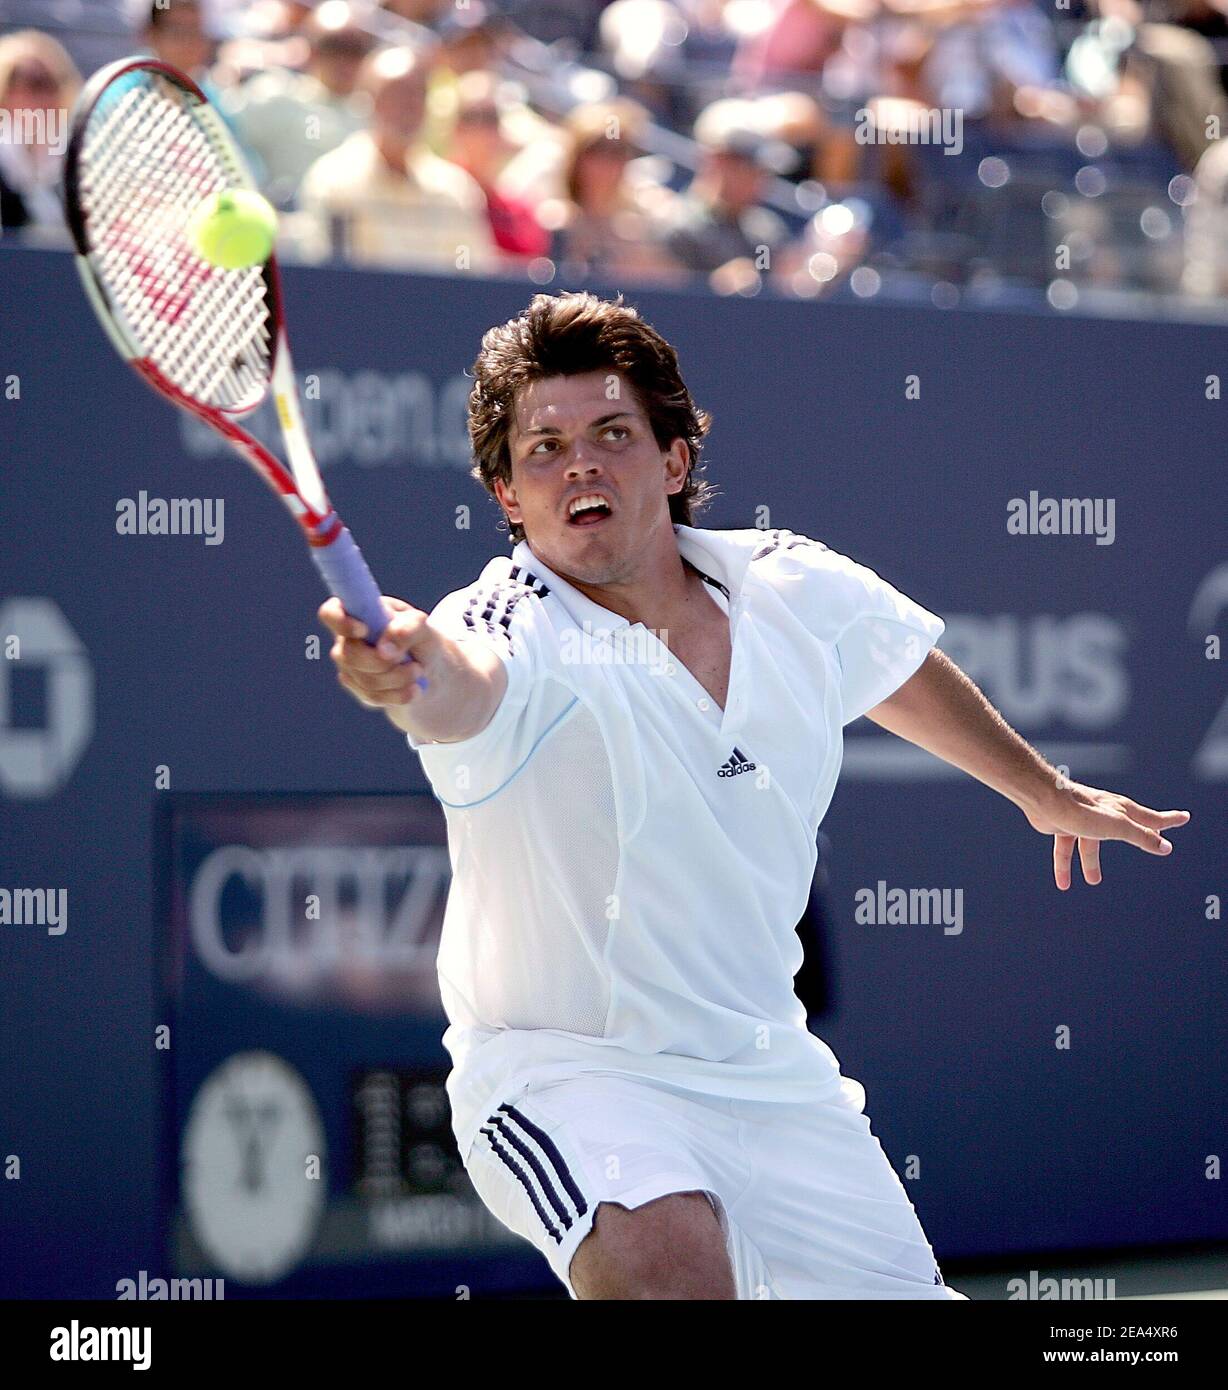 USA's Taylor Dent competes against Spain's Nicolas Almagro during the fifth day of competition at the 2005 US Open tennis tournament in Flushing Meadows, New York on September 2, 2005. Photo by William Gratz/ABACAPRESS.COM Stock Photo